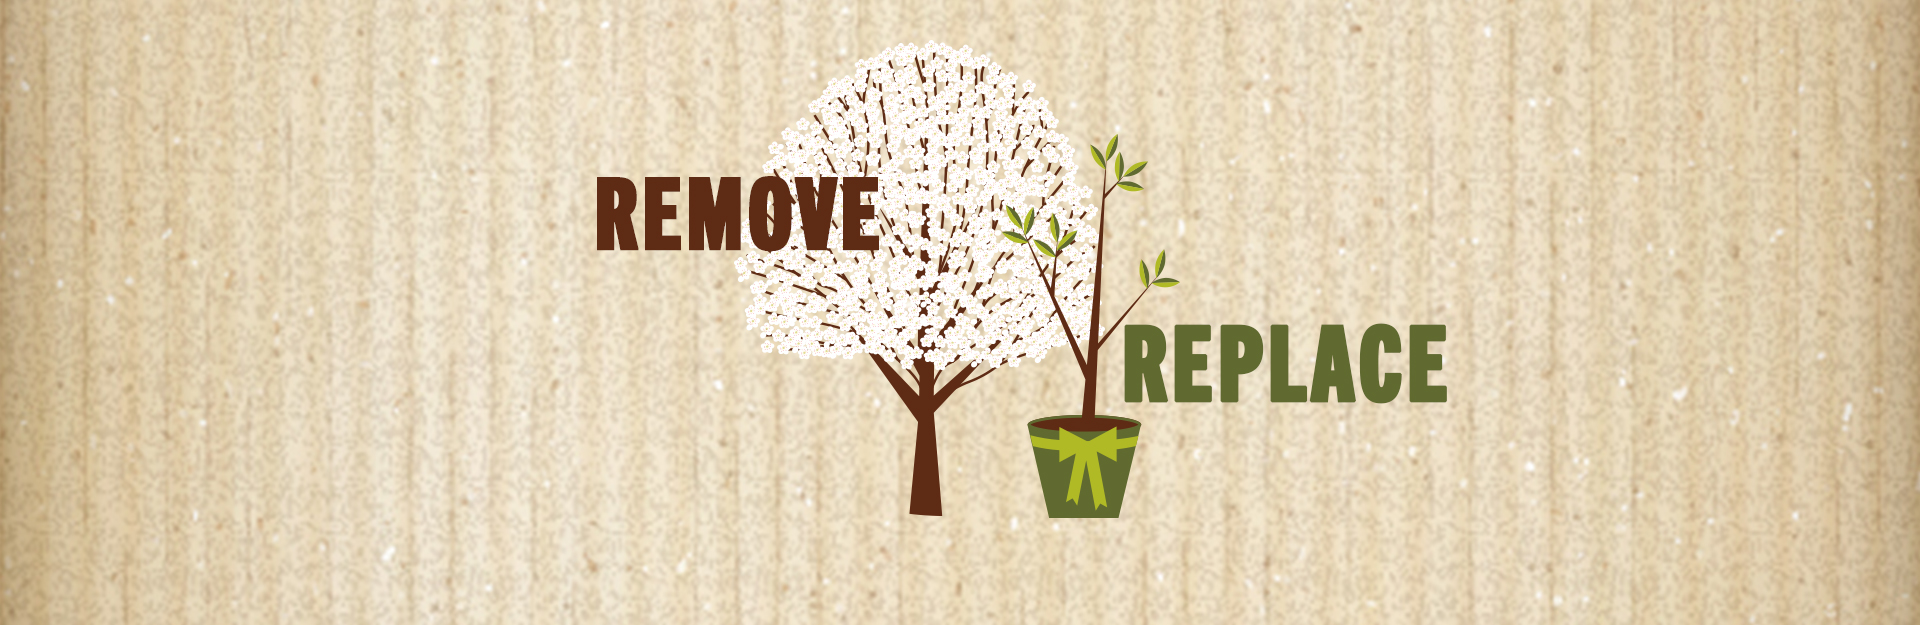 illustration of a bradford pear tree and a young potted tree, word remove and replace